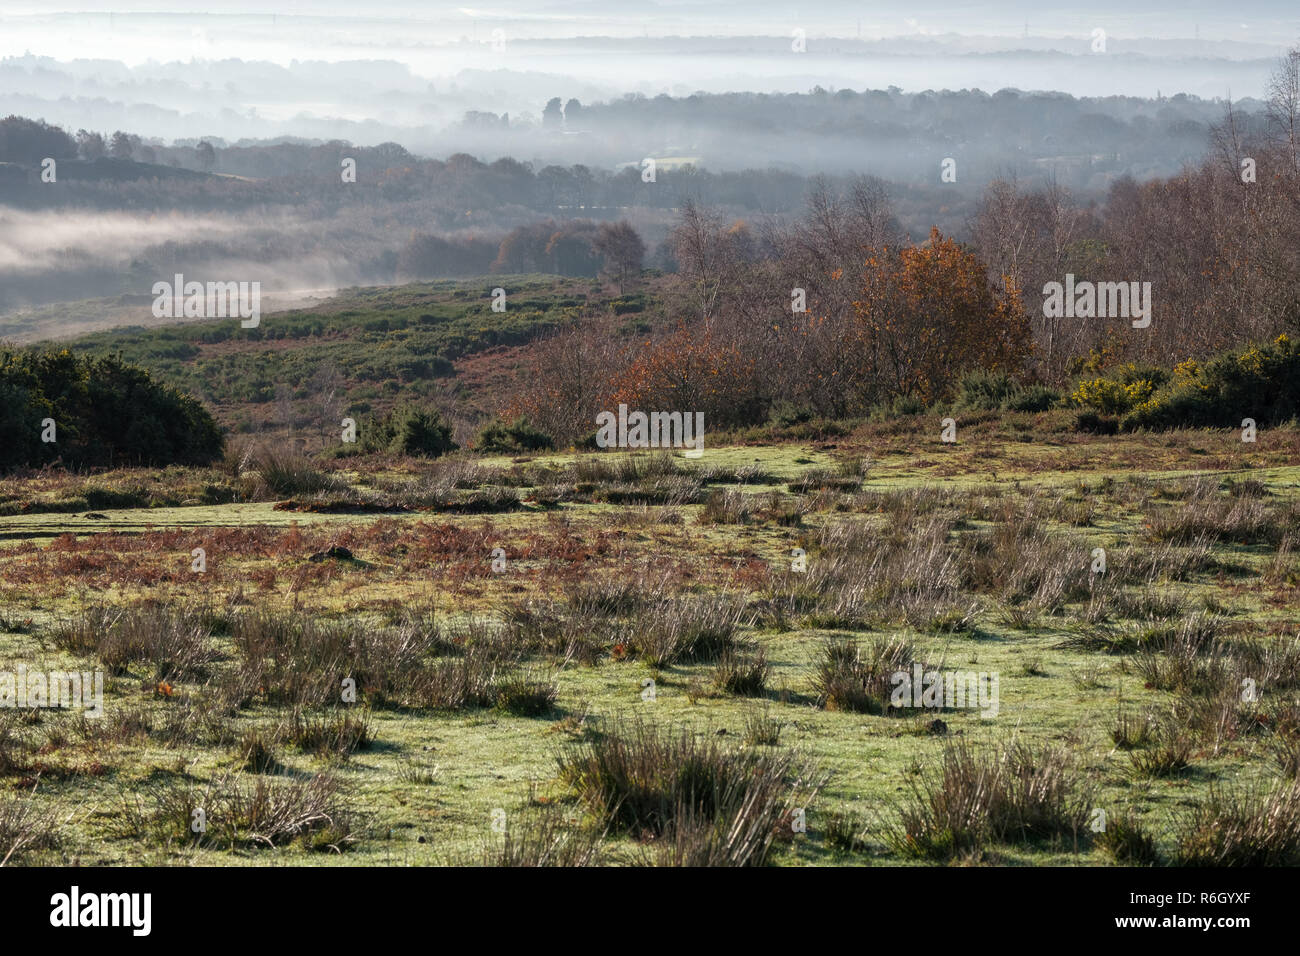 Misty morning in the Ashdown Forest Stock Photo